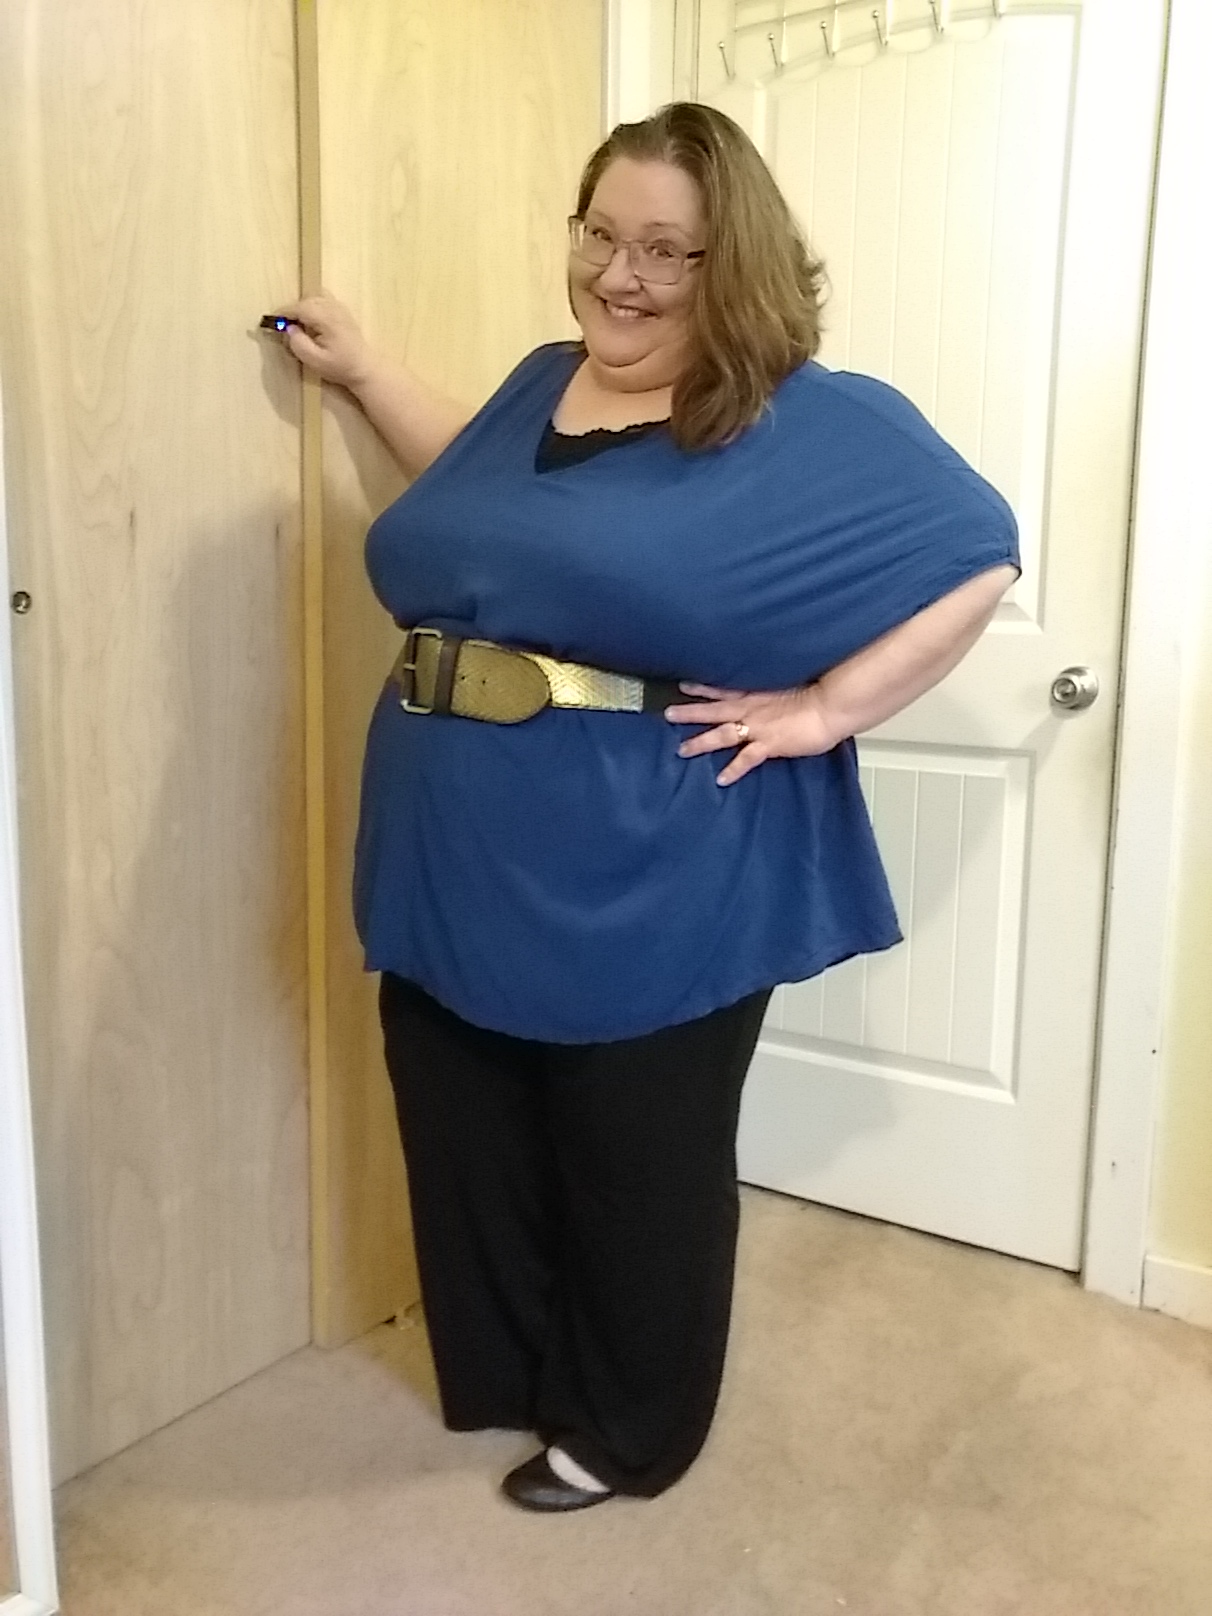 Plus Size Fashion Mistakes - Are They Really Mistakes?deas - Photo Shoot January 17, 2020